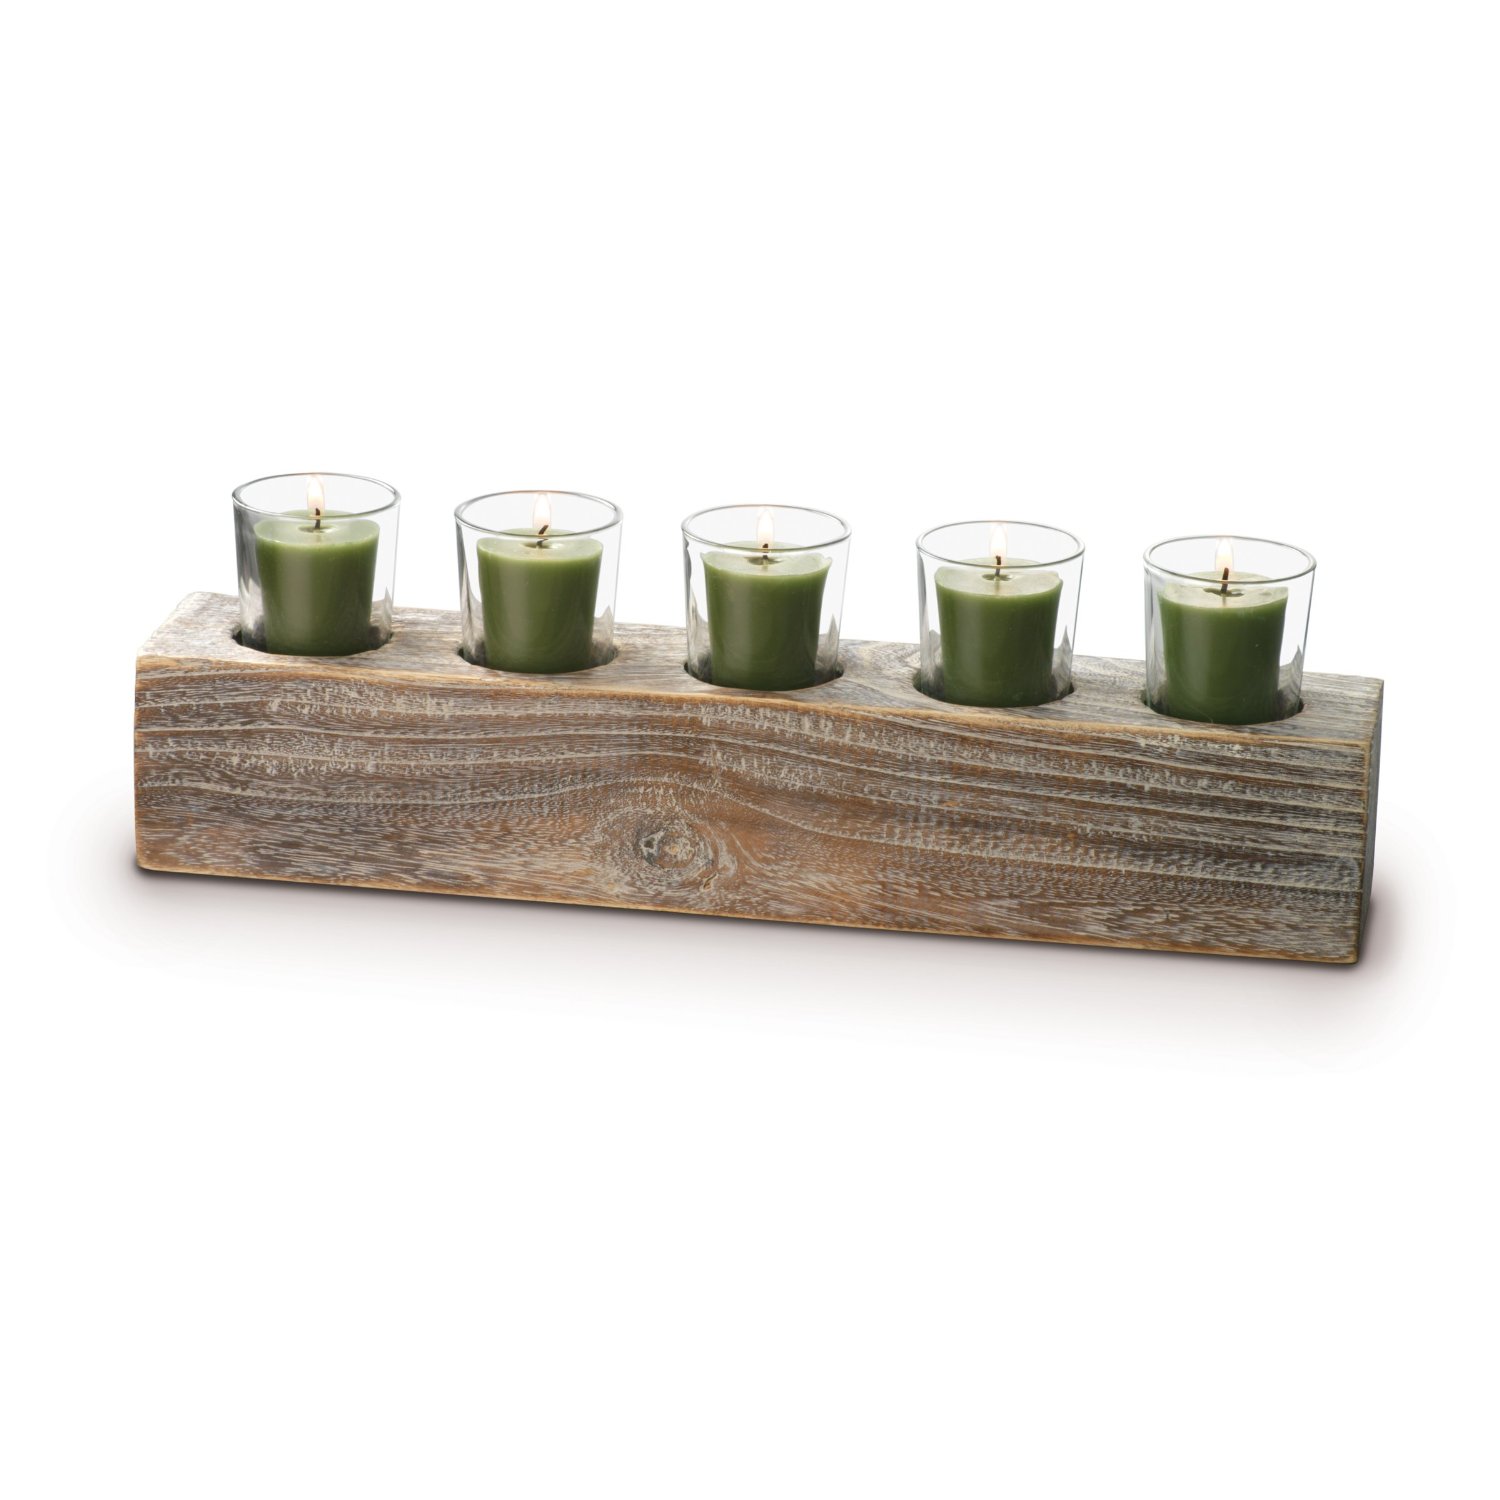 Anchor Home Collection Wooden Base Candle Holder with 5 Glass Votive Cups